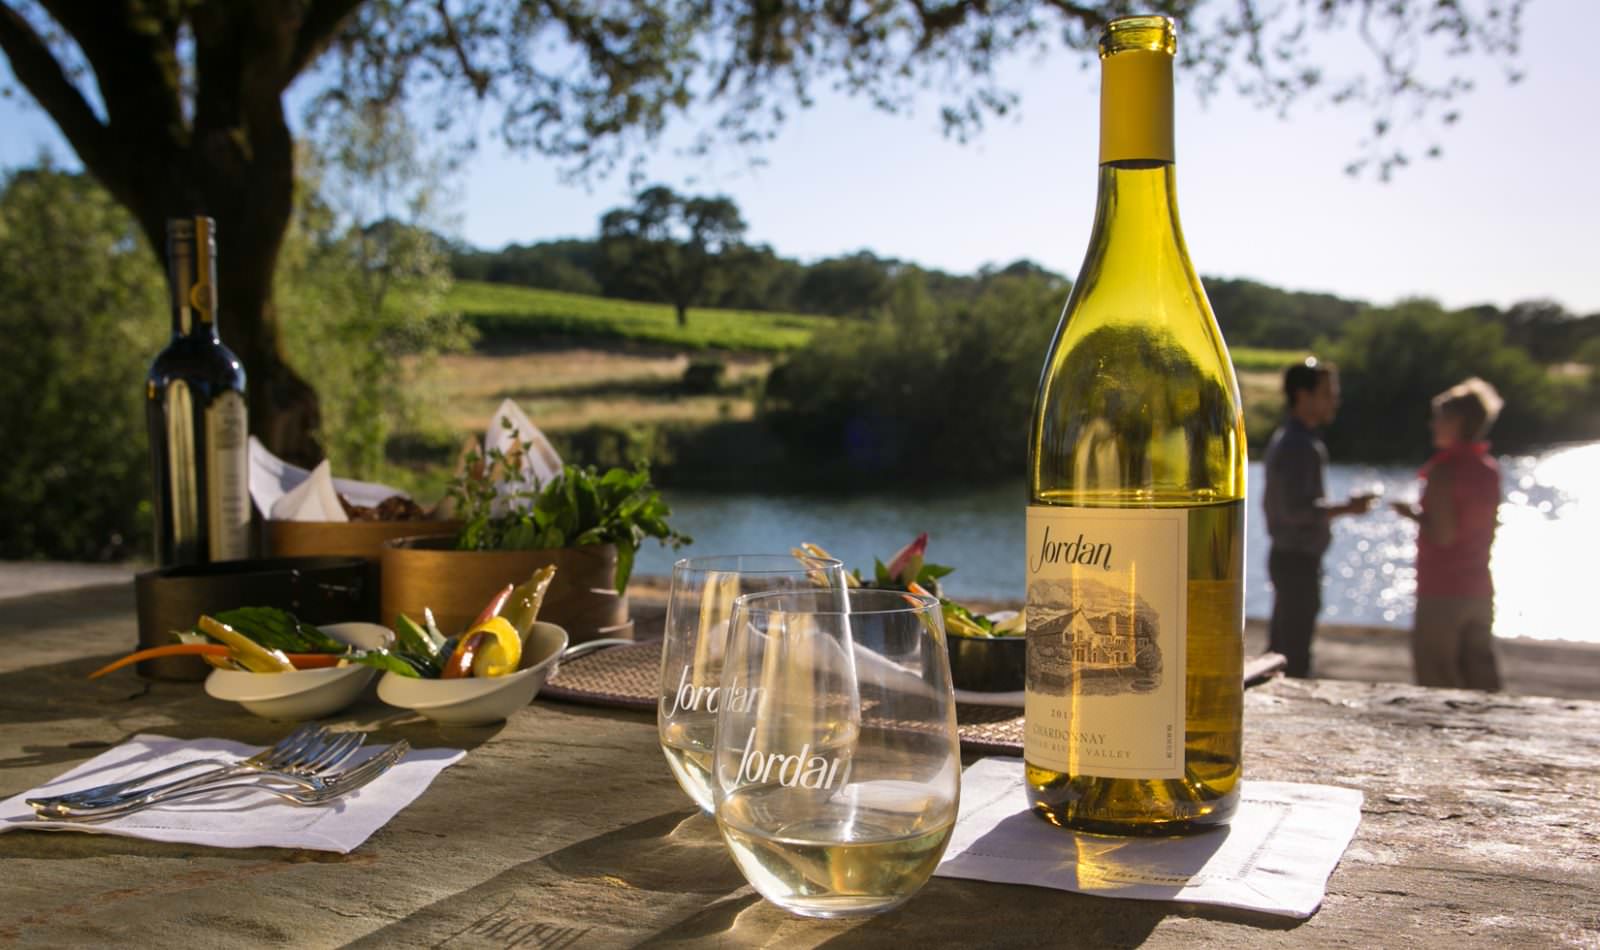 bottle of Jordan Winery Chardonnay with two logo glasses and bites of food on the Jordan Winery property